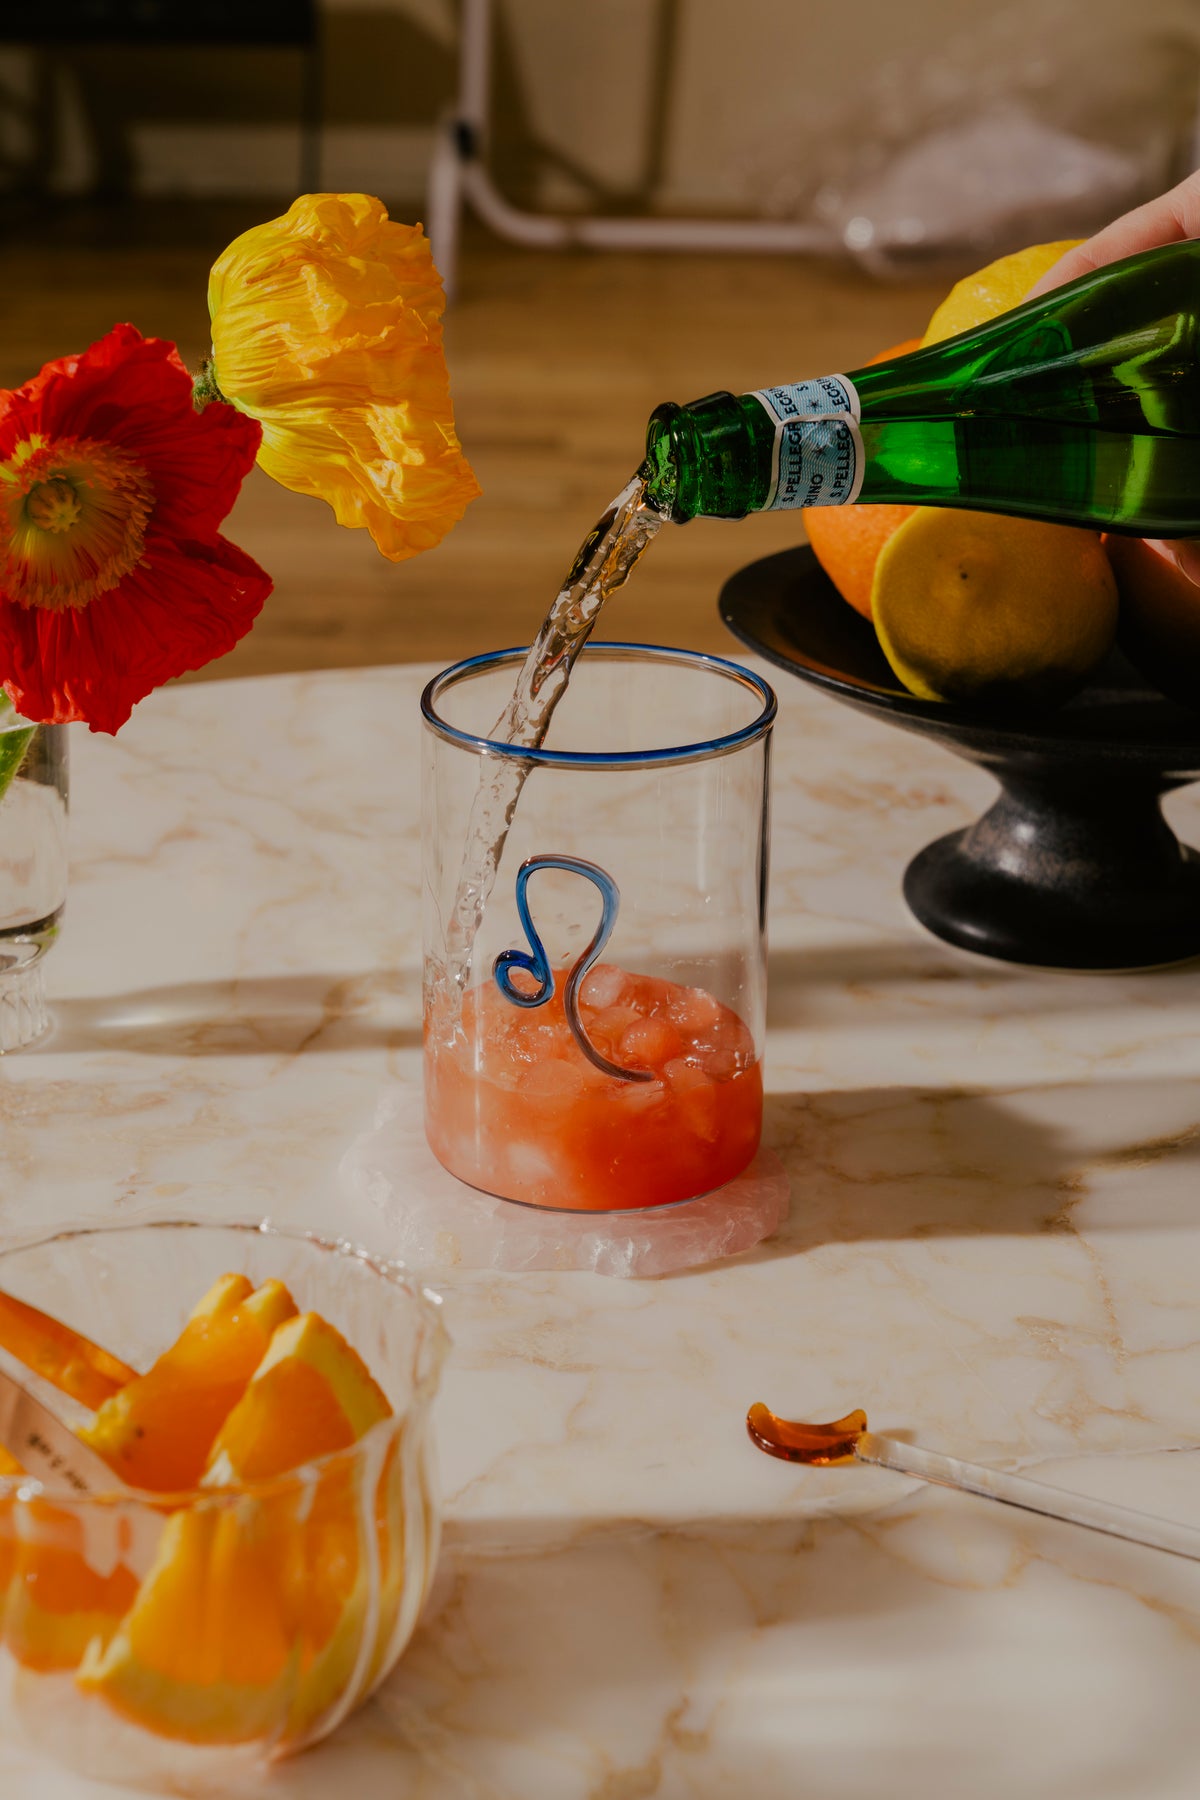 A Pomelo Margarita in a hand-blown, clear glass tumblers come with a bright twist—an almost electric lip in cobalt blue and Leo Zodiac design. In the background, a vibrant yellow poppy and a red flower add a burst of color, while a bowl of citrus fruits on a pedestal provides a backdrop for a dinner with the girlies.